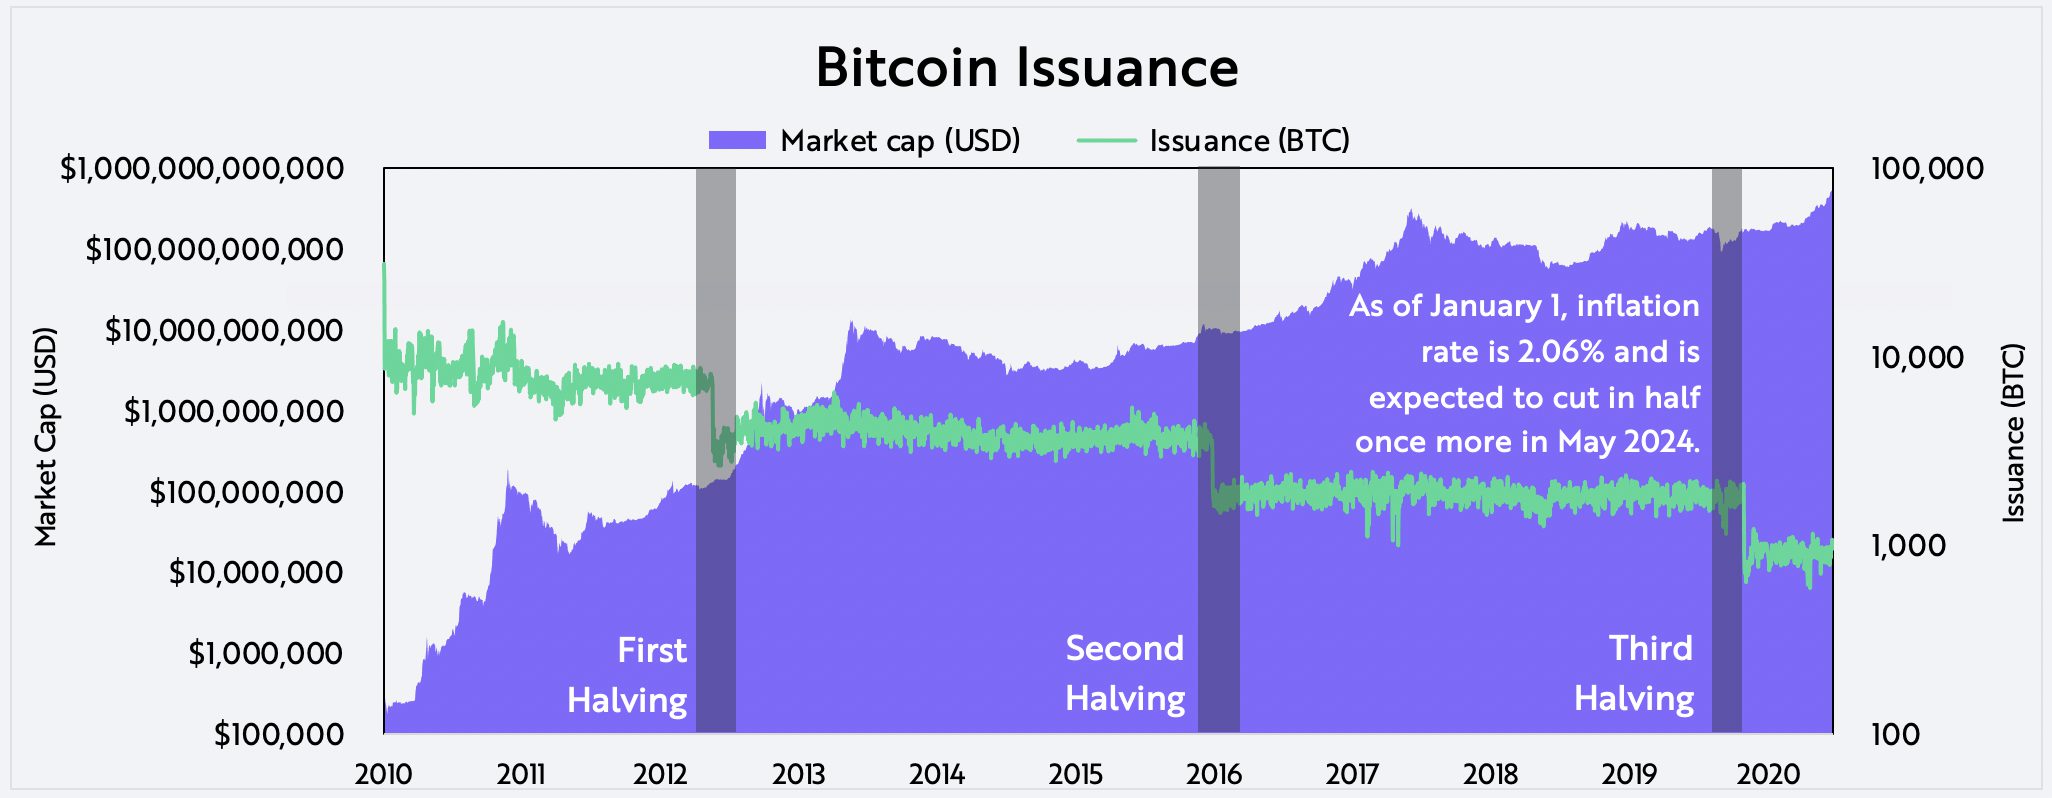 Evaluating Bitcoin Issuance on-chain data